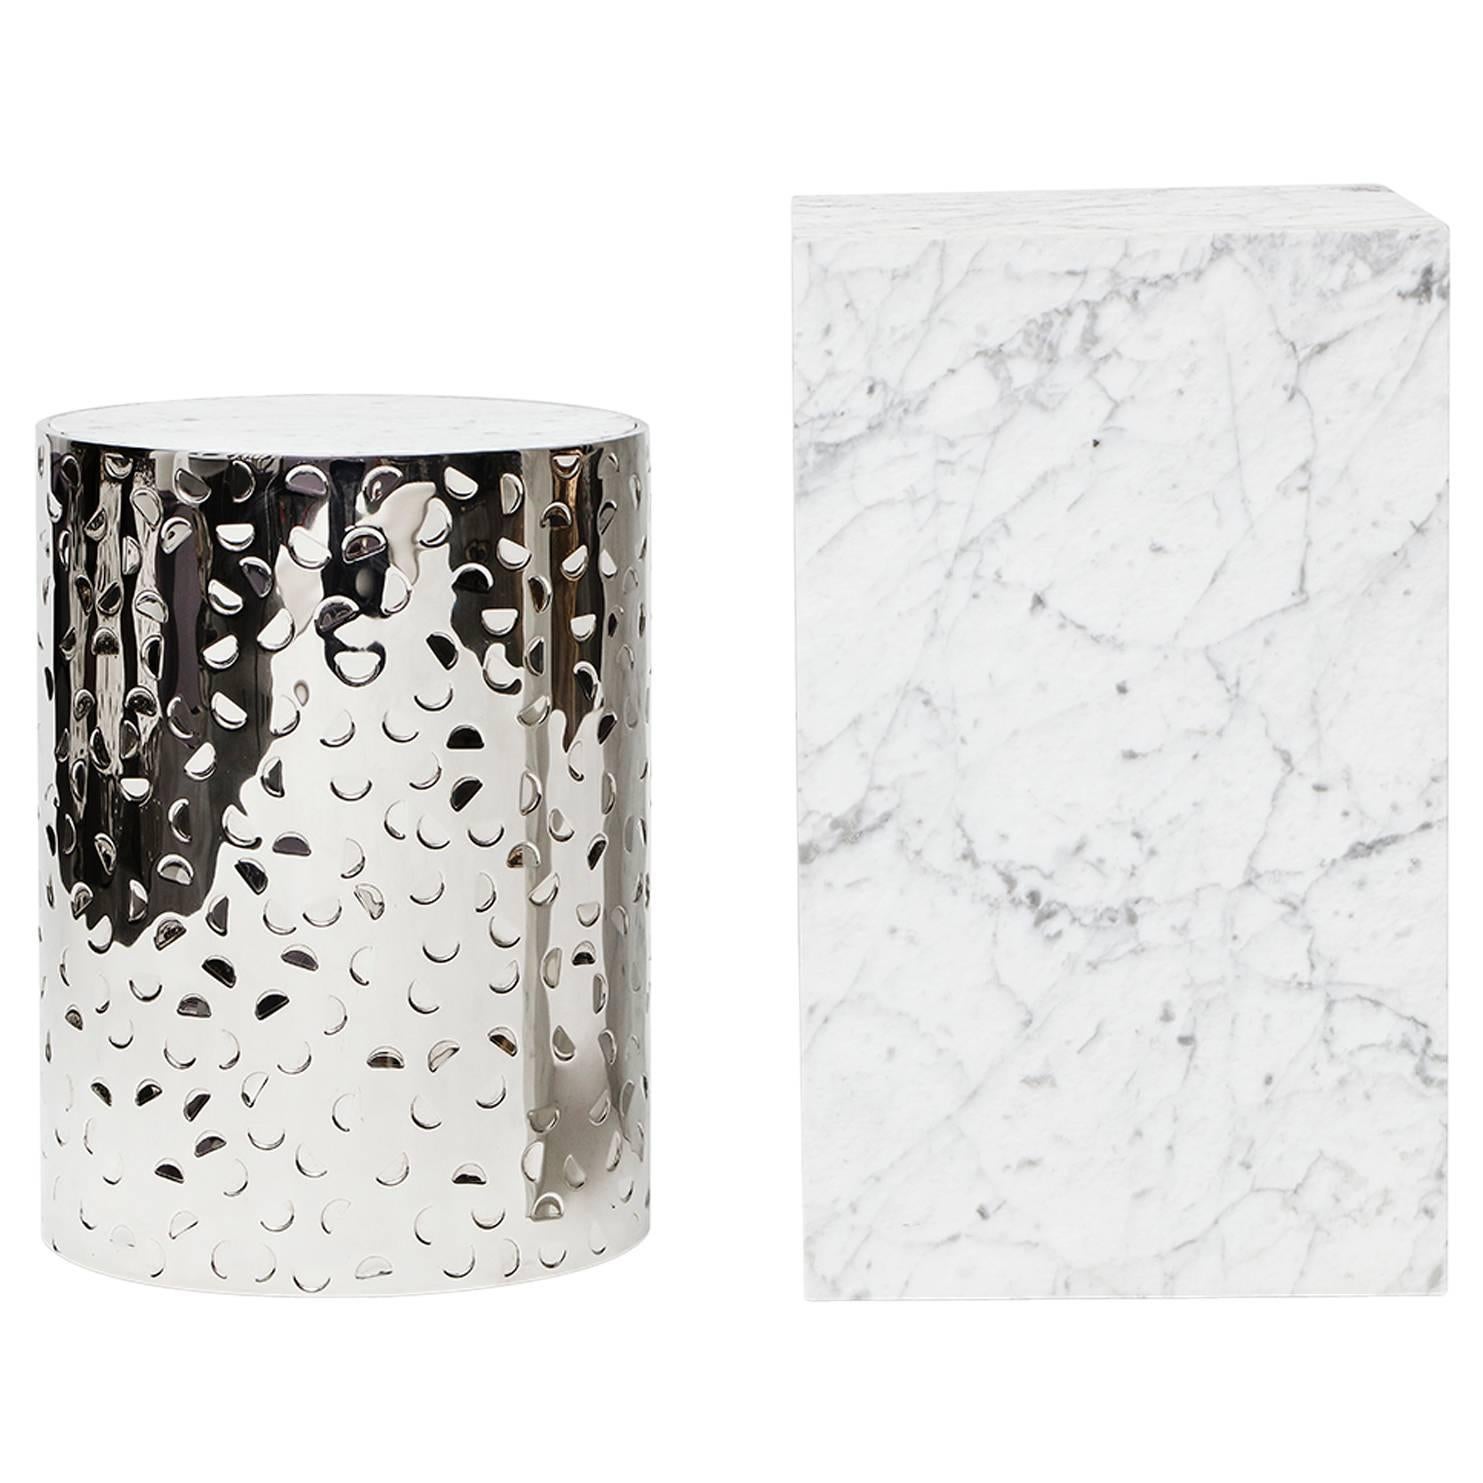 BIAFO + AIALIK nesting tables - Hand-Hammered Stainless Steel + Marble  For Sale